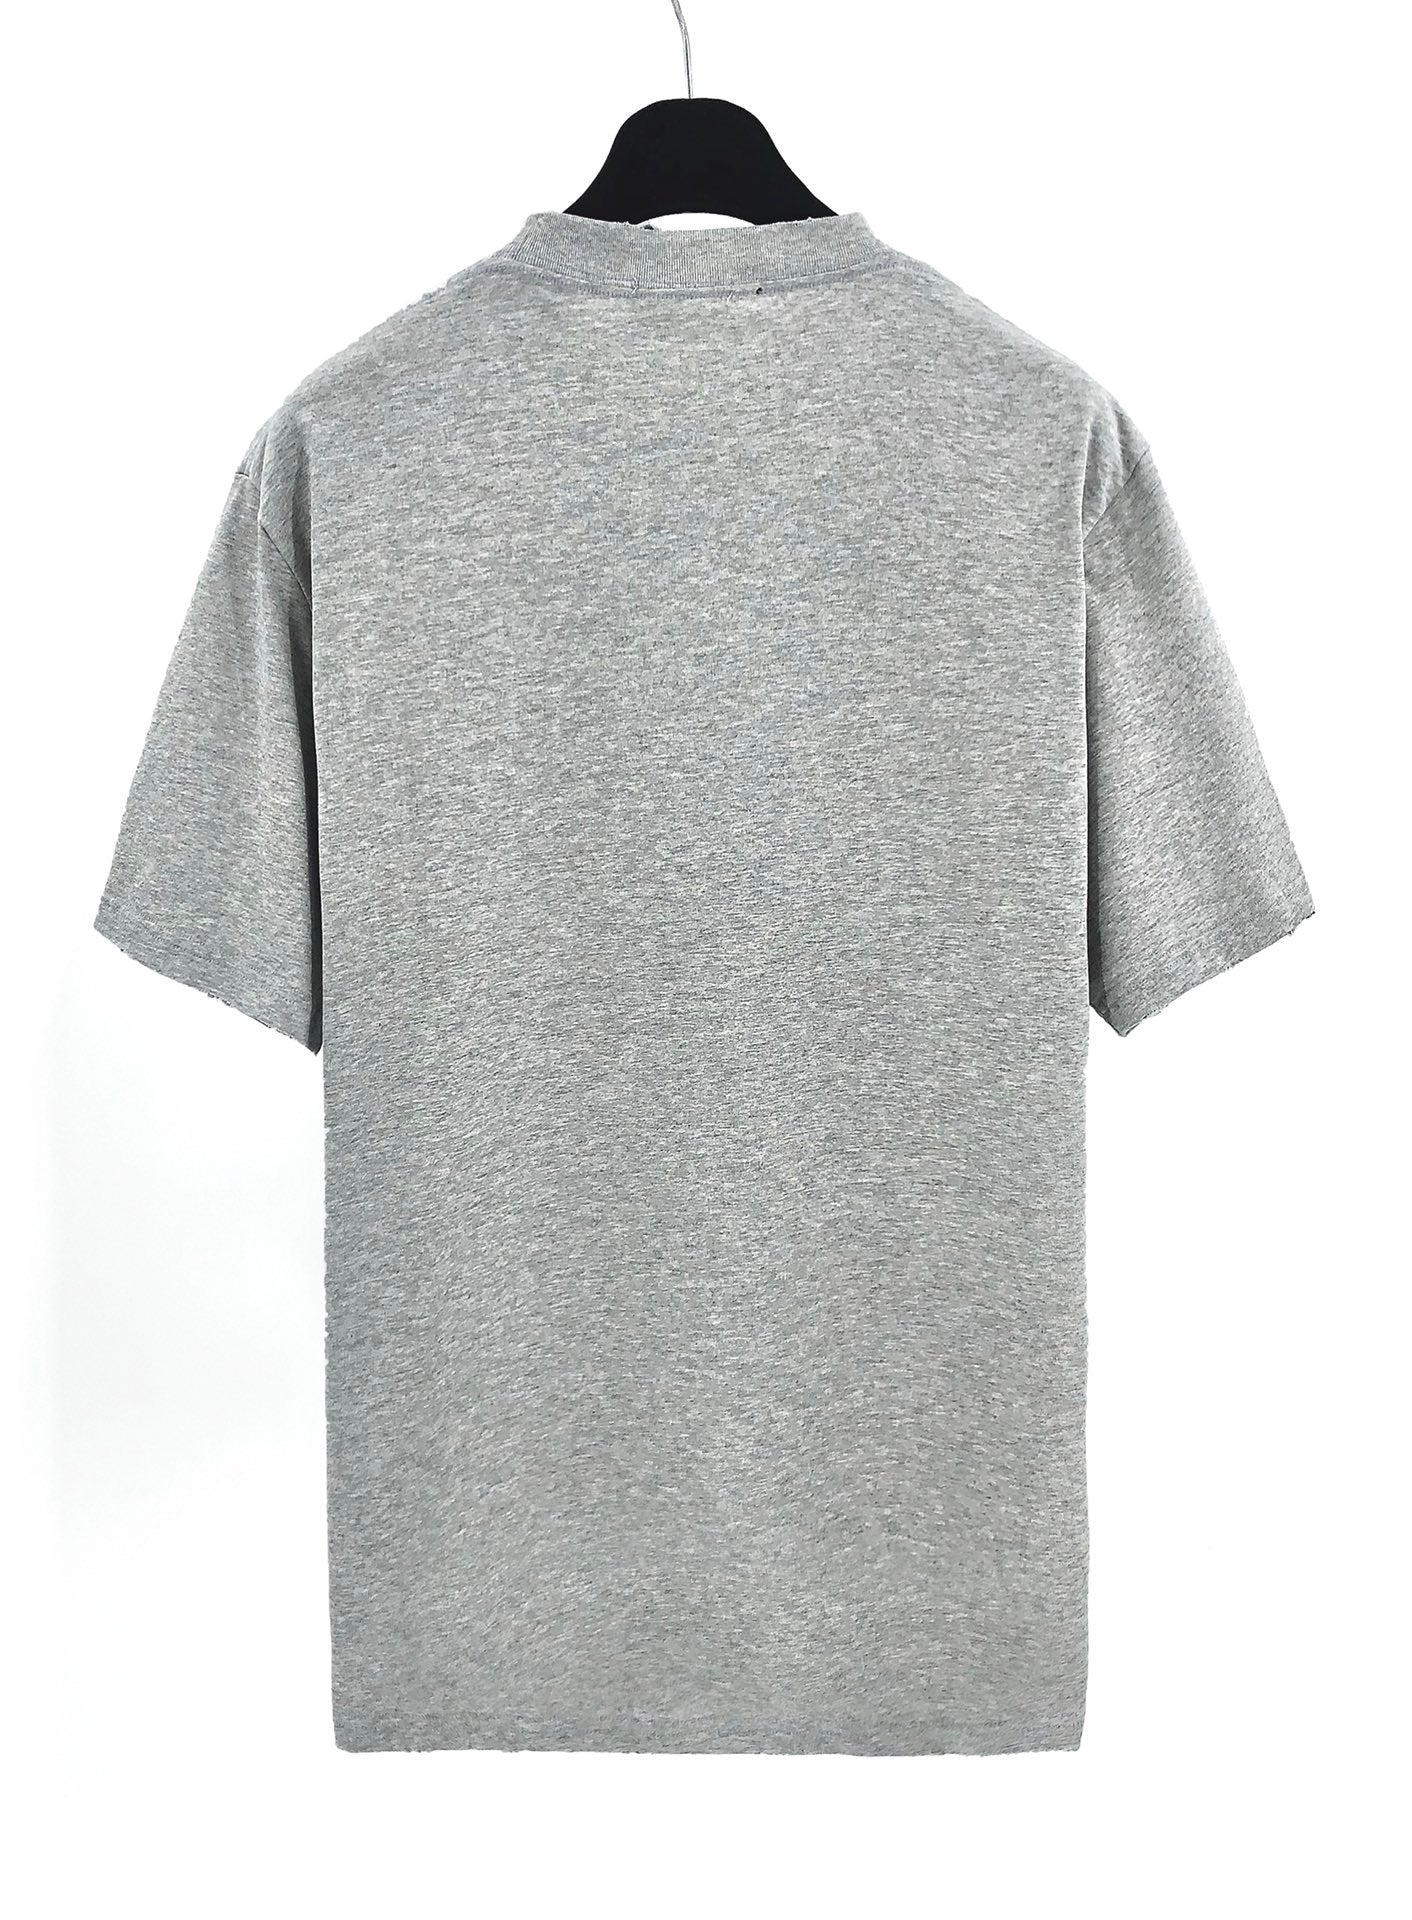 Light pink and grey T-shirts